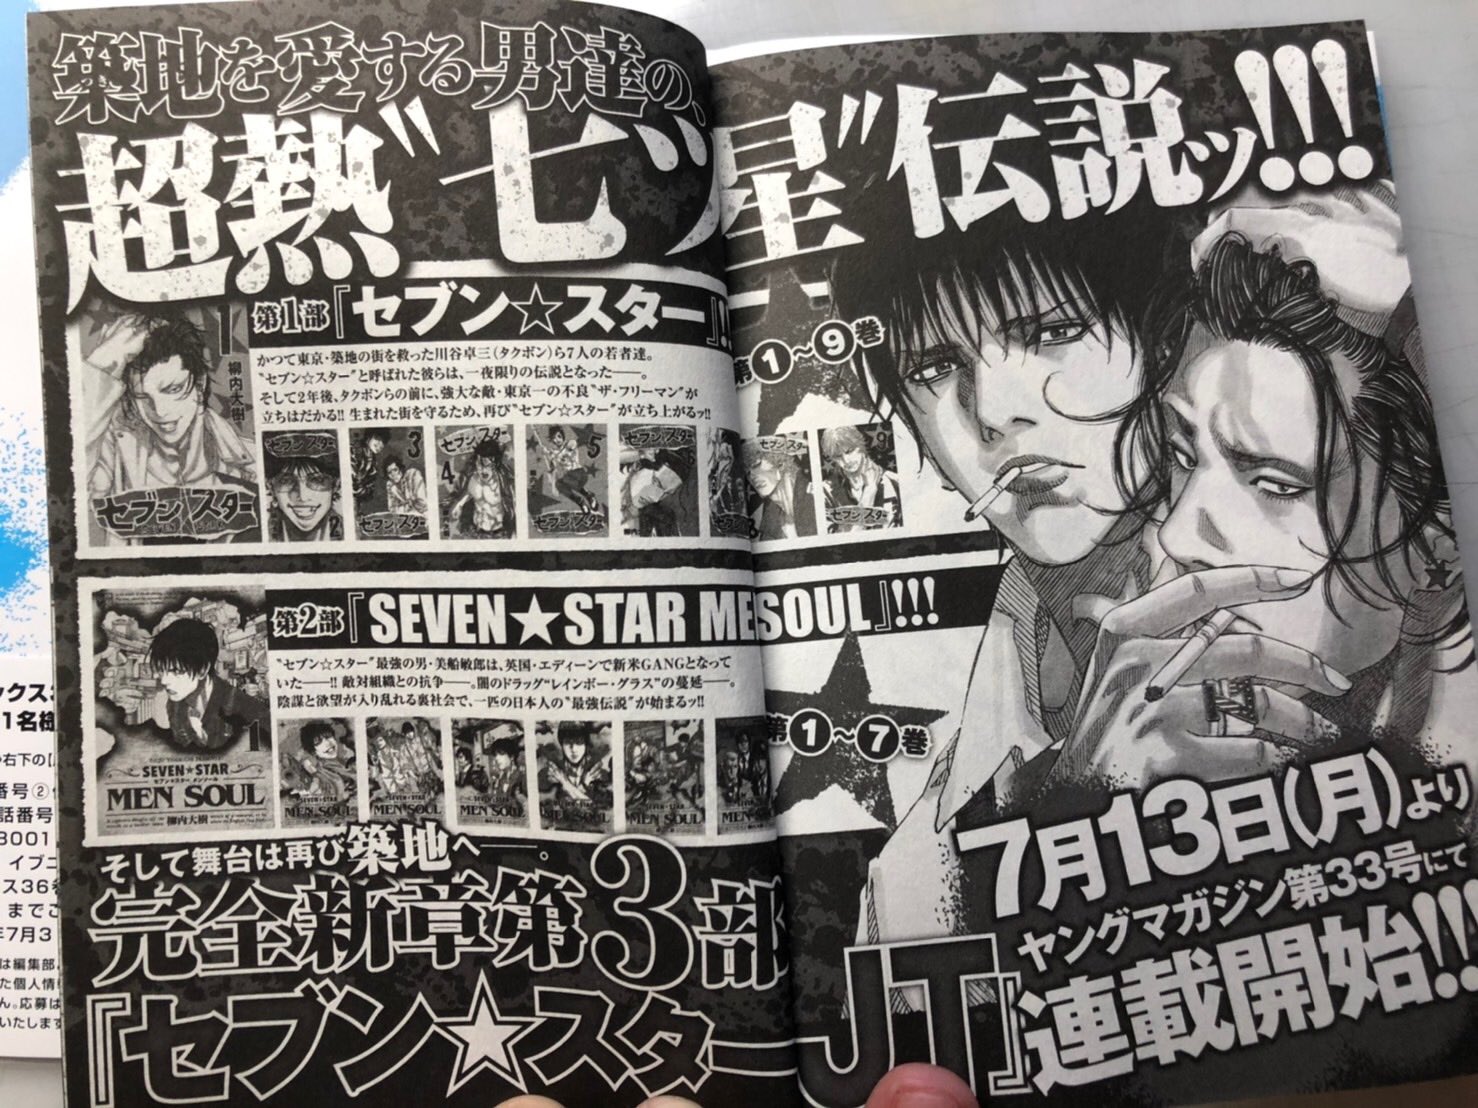 Young Magazine News Speaking Of Daiju Yanauchi The 3rd Part Of The Seven Star Manga Series Will Begin Serialization On Wym Issue No 33 The Story Picks Up After The Events Of Seven Star Men Soul And Is Titled Seven Star Jt